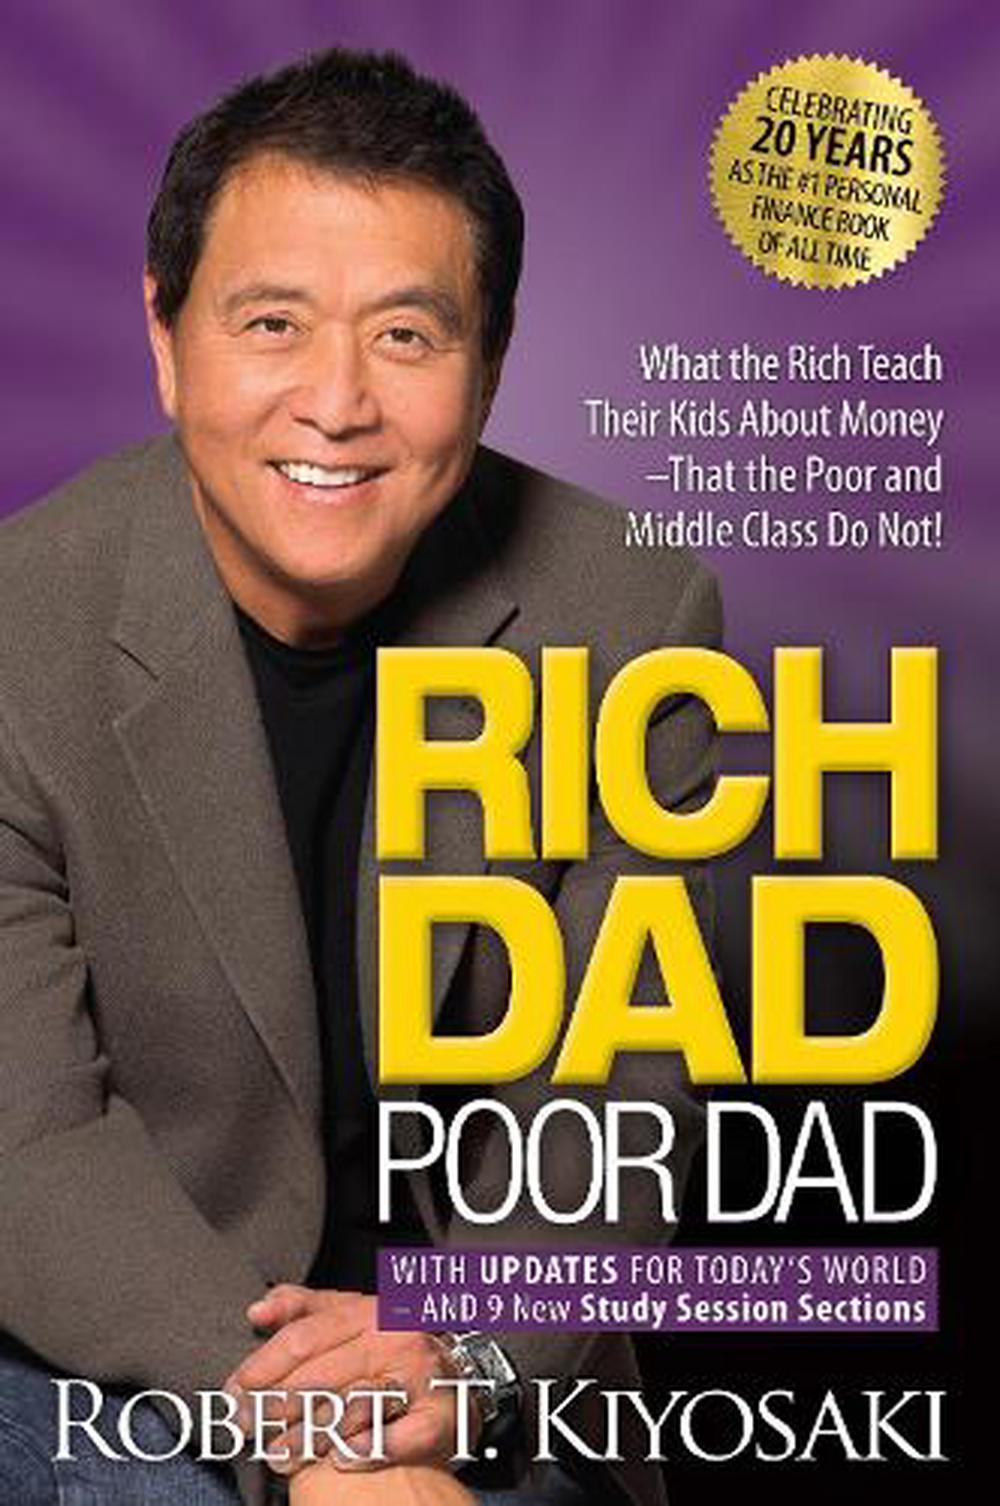 book review for rich dad poor dad